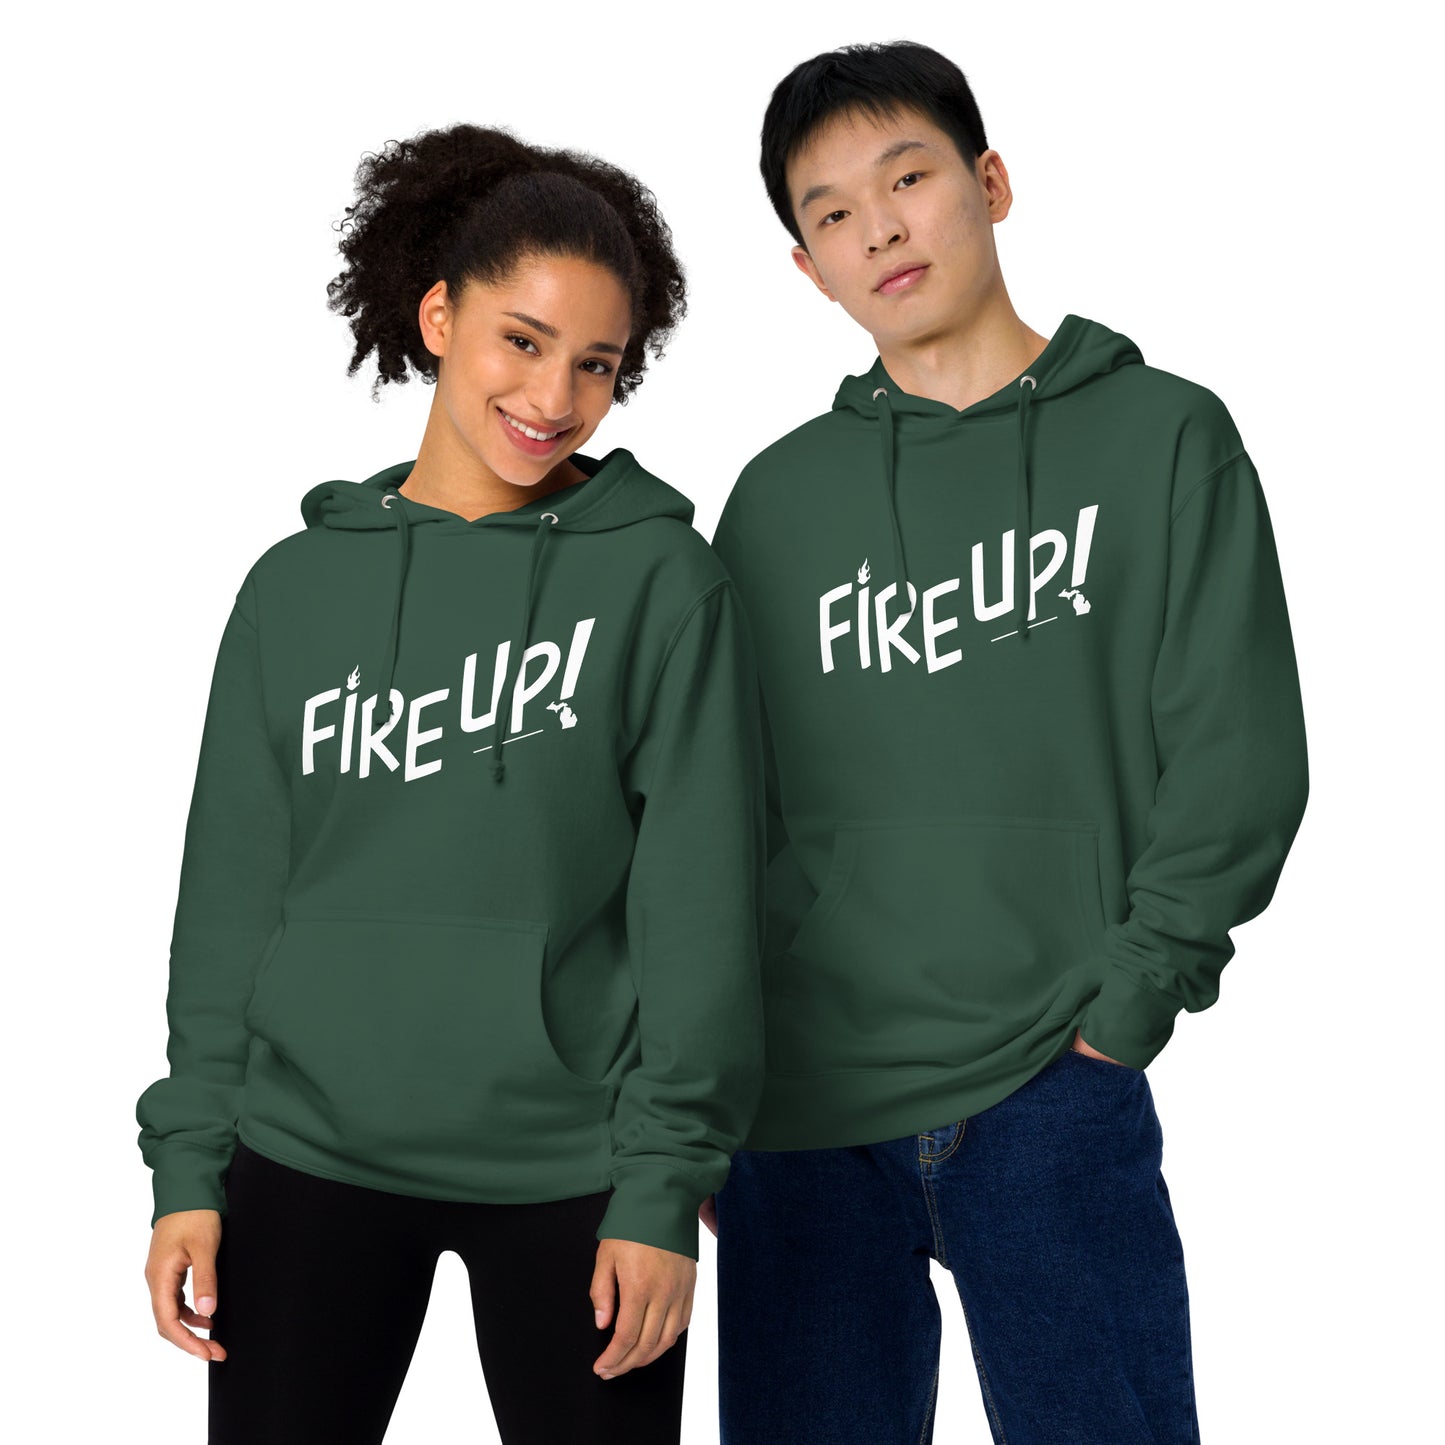 Fire Up! Unisex midweight hoodie